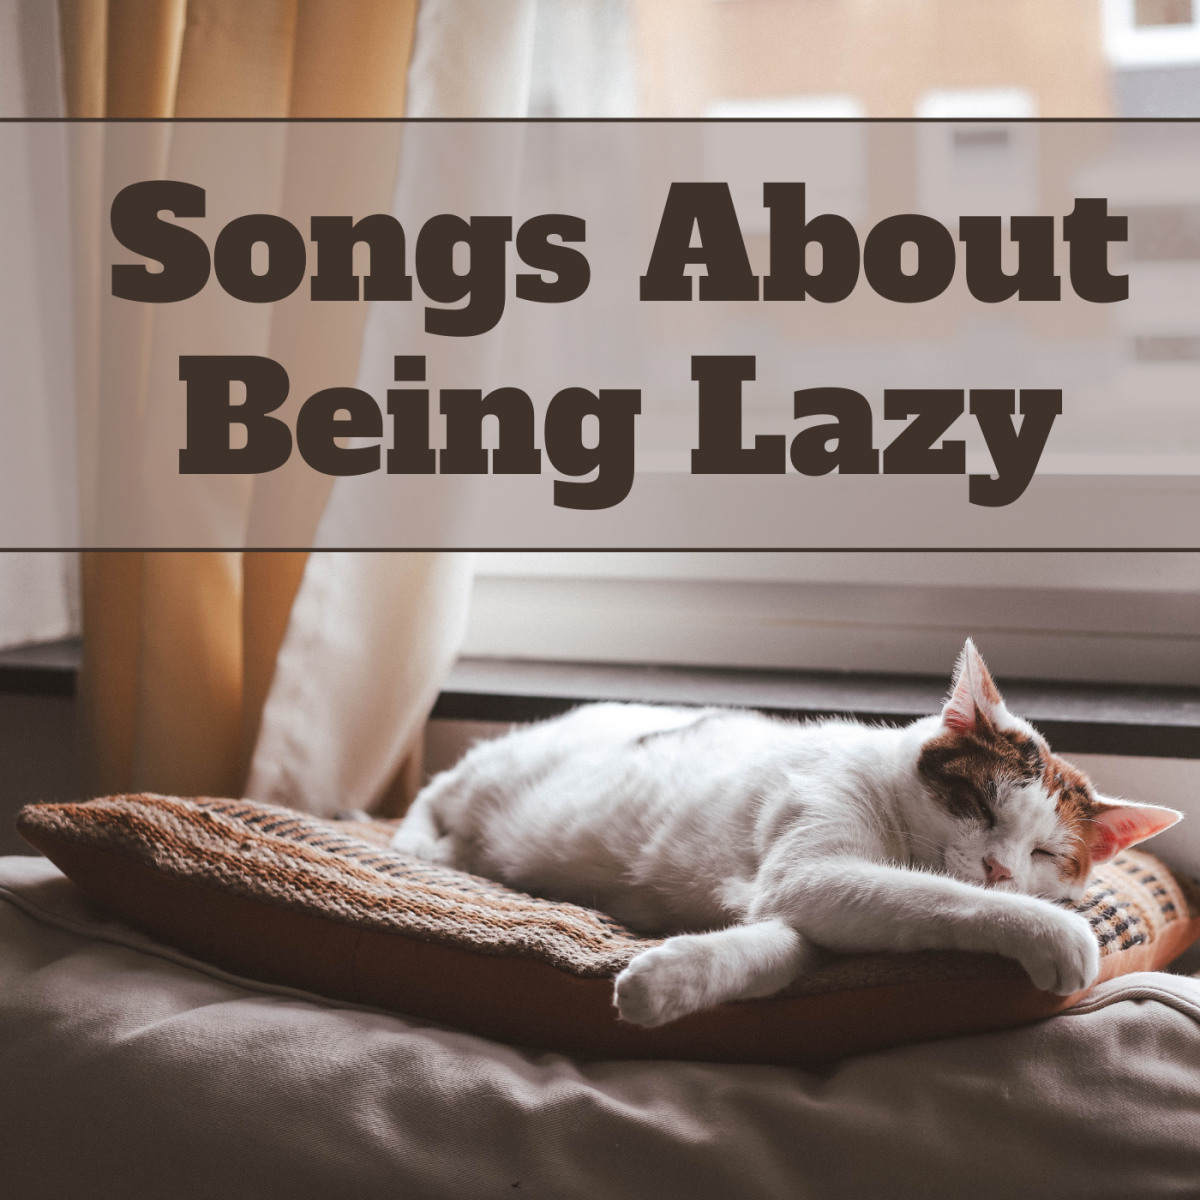 34 Songs About Being Lazy